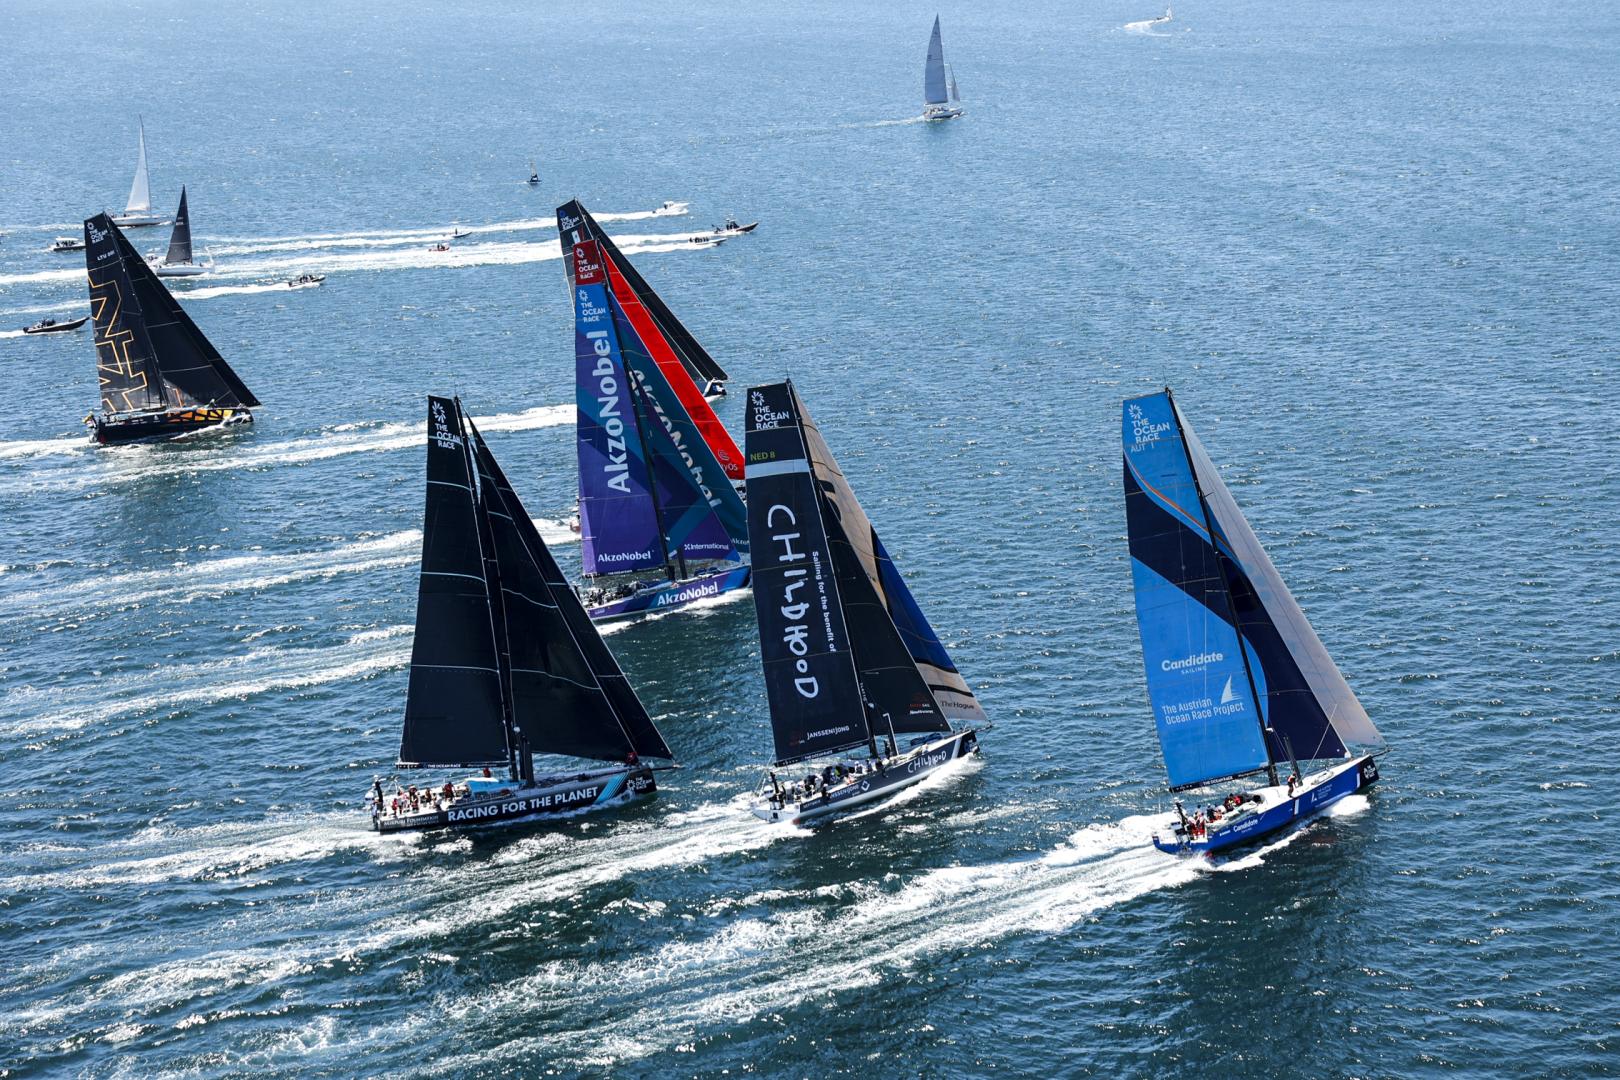 Second Leg of The Ocean Race Europe, from Cascais, Portugal, to Alicante, Spain.